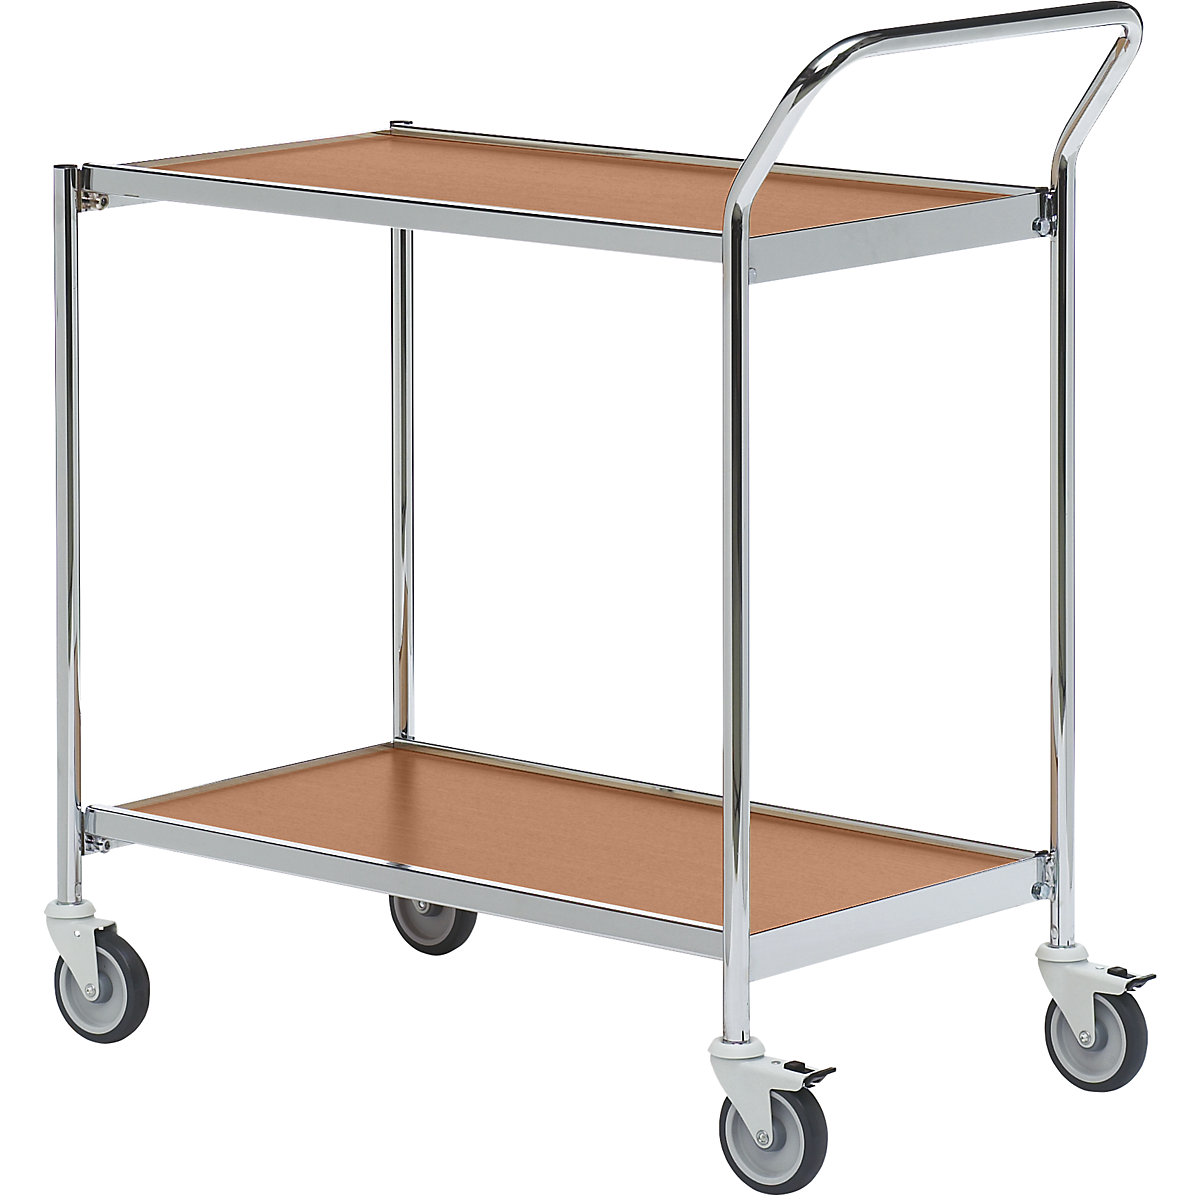 Table trolley – HelgeNyberg, 2 shelves, LxW 1000 x 420 mm, chrome/beech, 5+ items-6